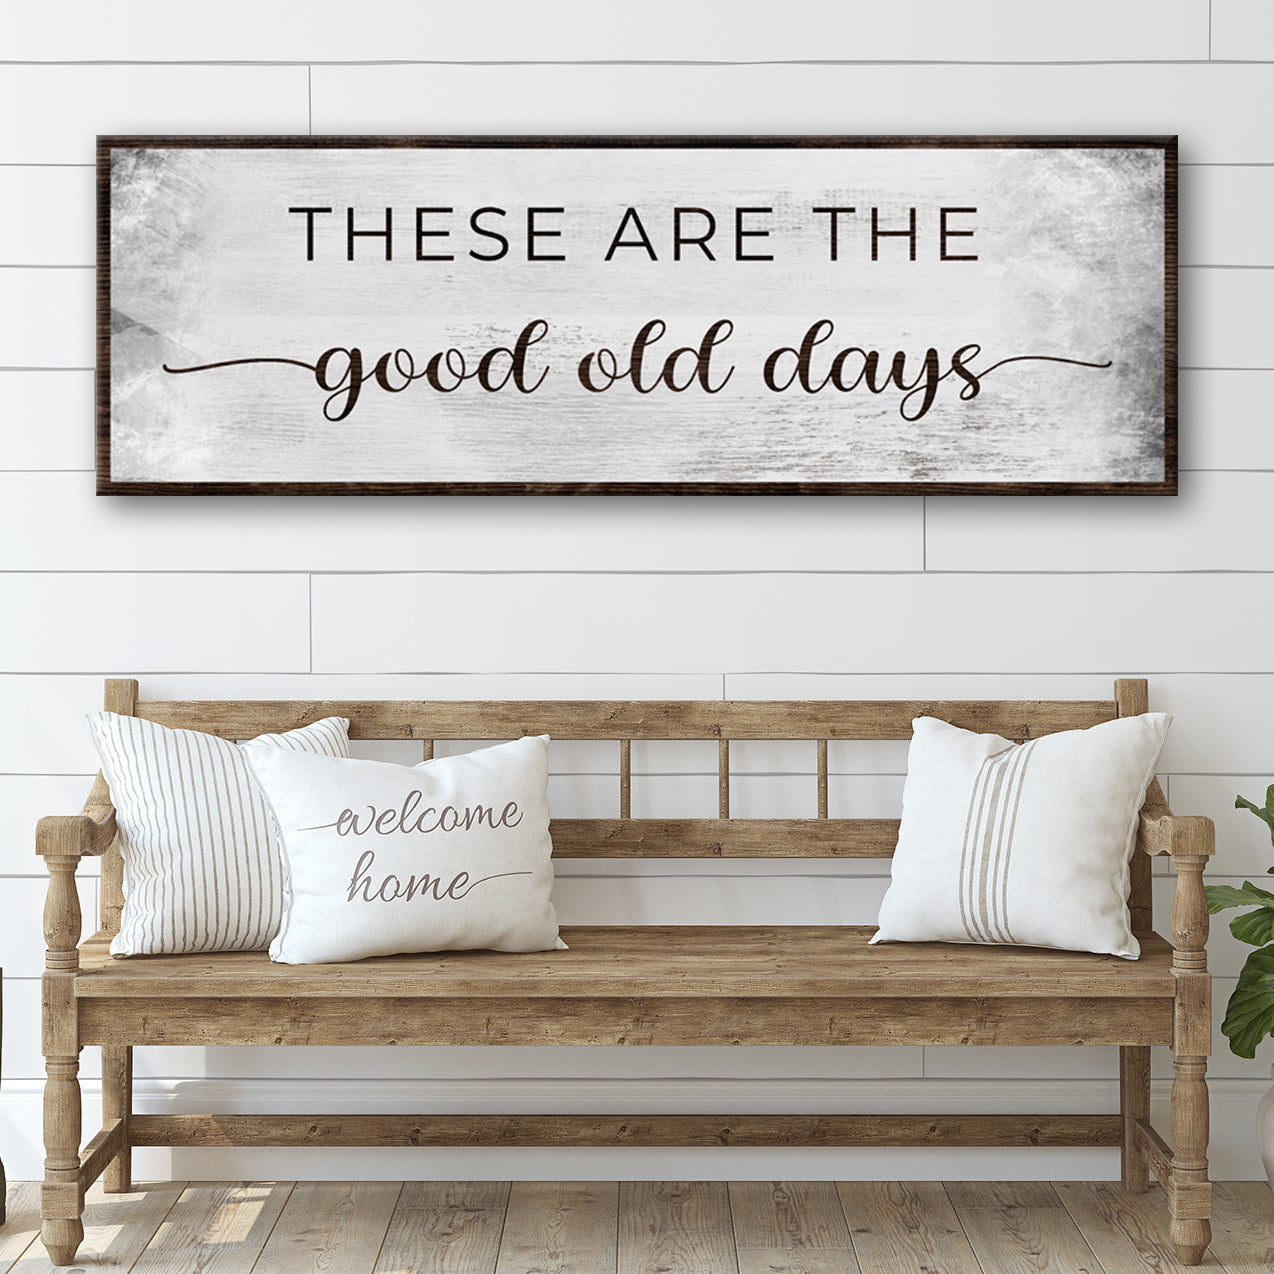 These are the good old days Sign II - Image by Tailored Canvases